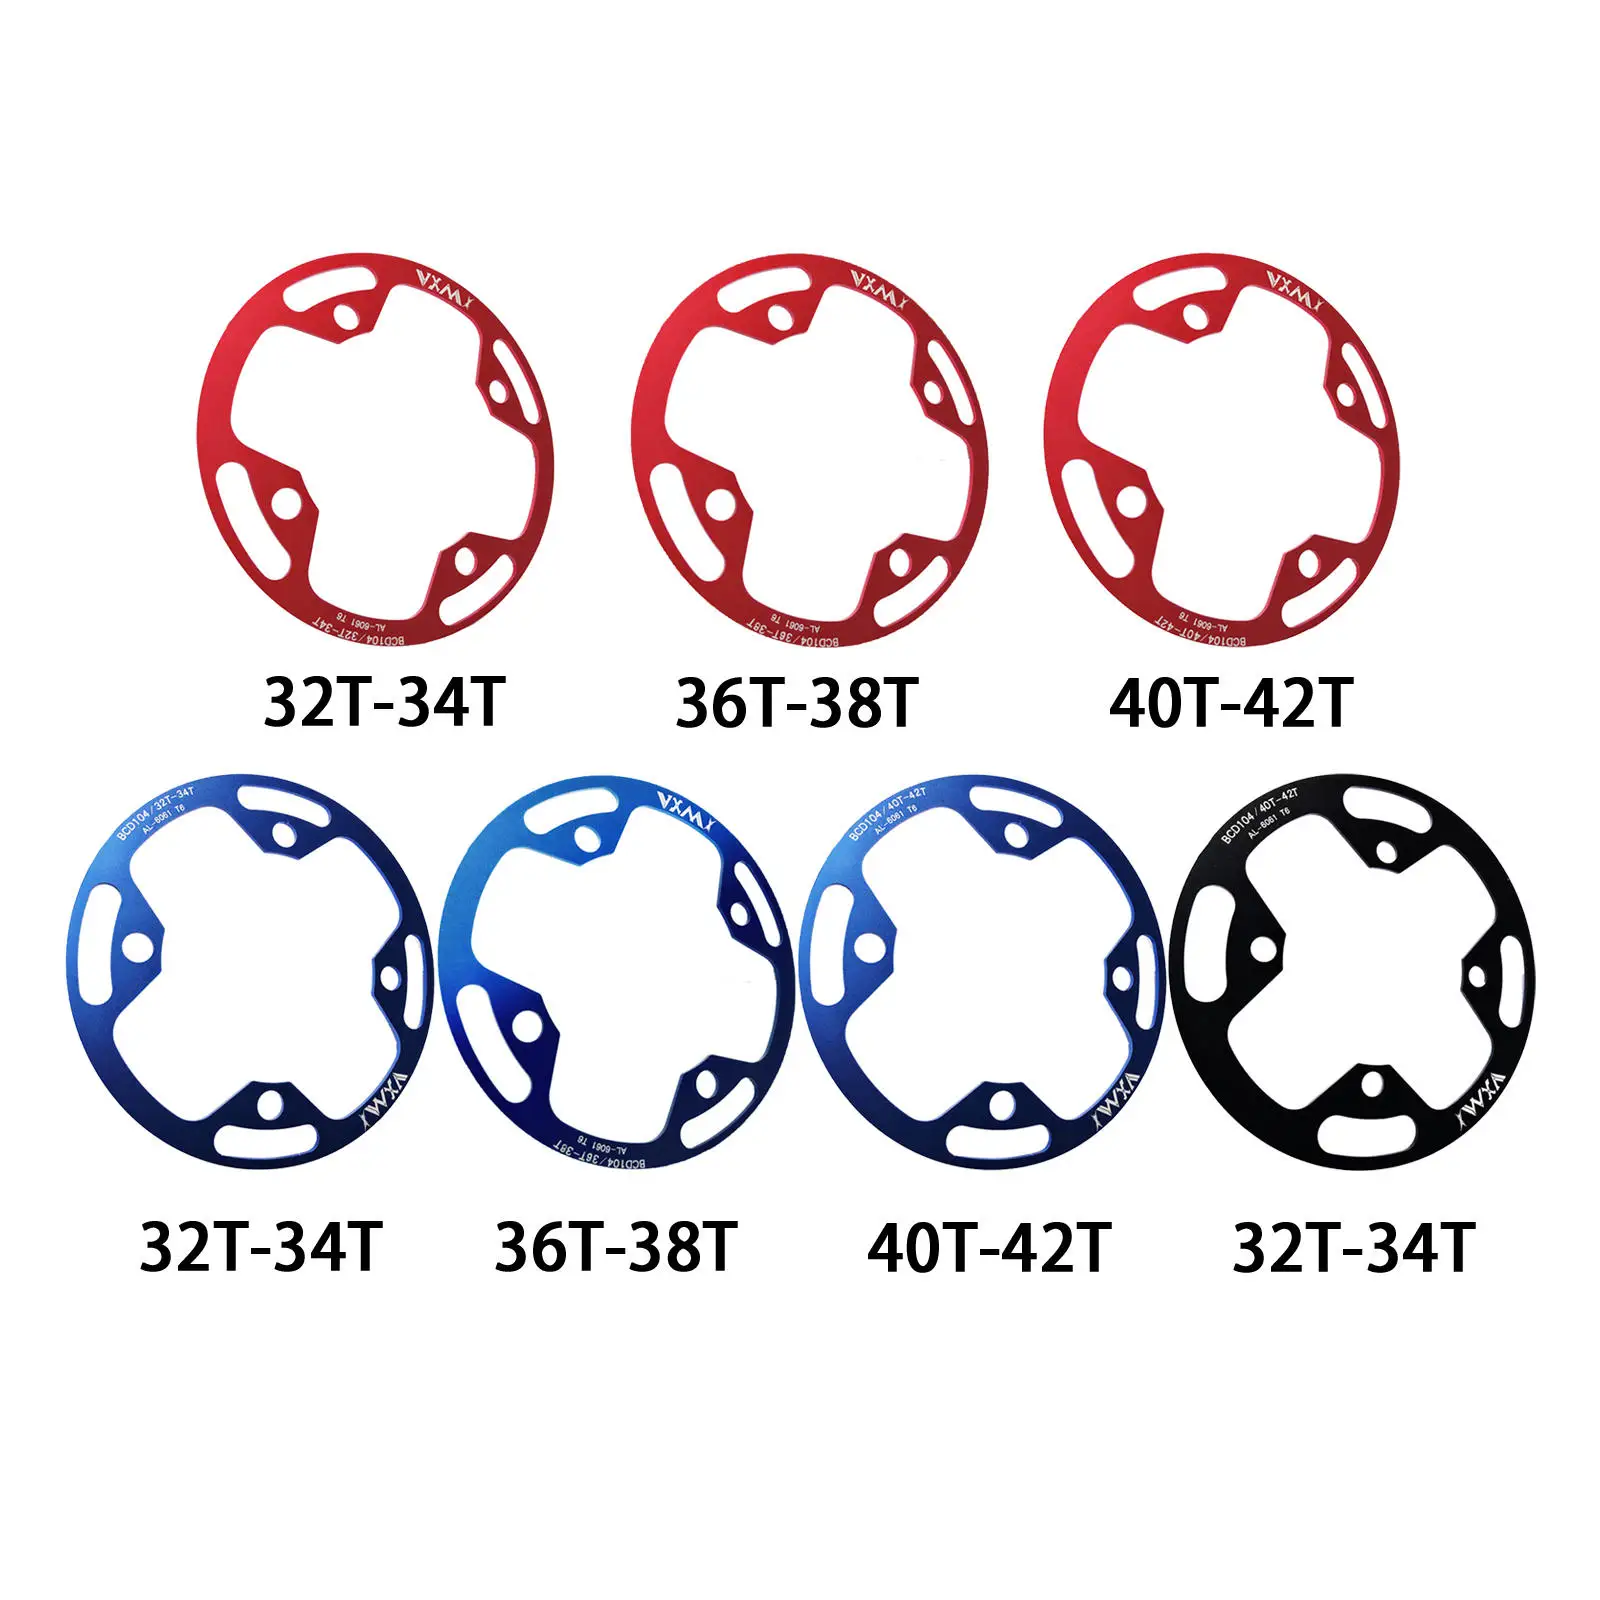 Bike Chain Cover -Bike Chainwheel Crankset Protection Cover Chain Ring Guard for Mountain Road Bicycle